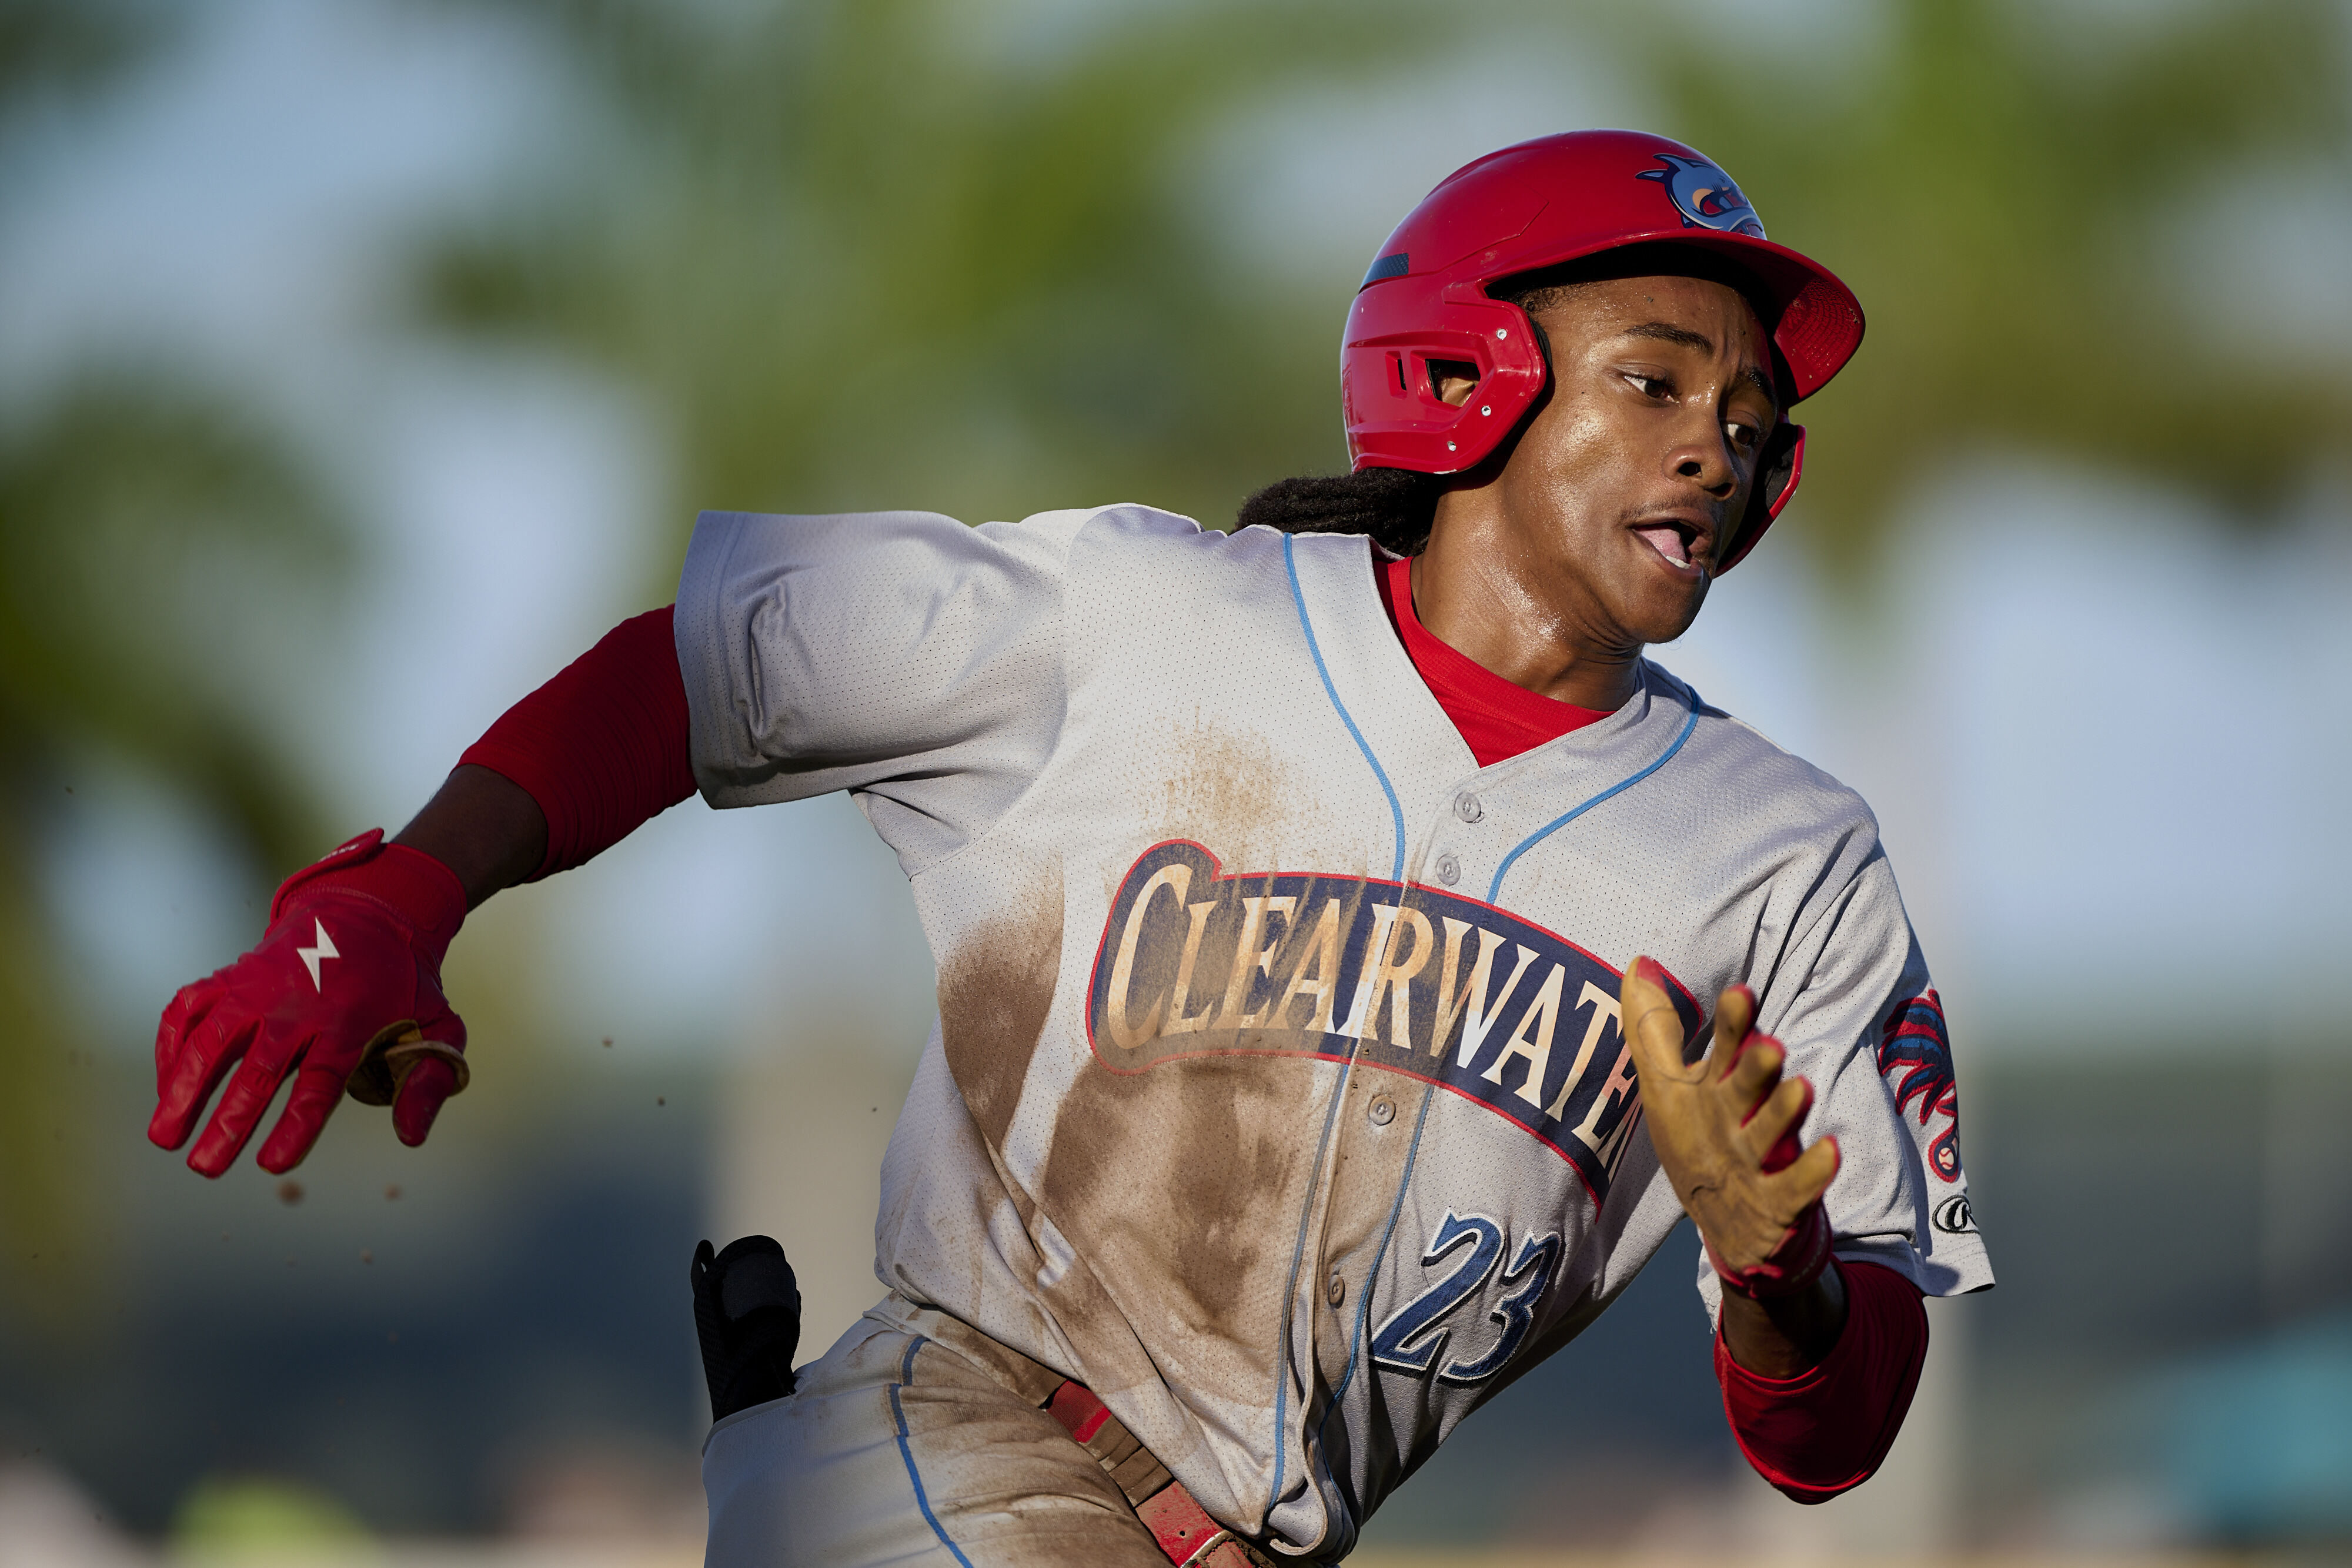 Clearwater, Phillies' minor-league affiliate, building winning culture